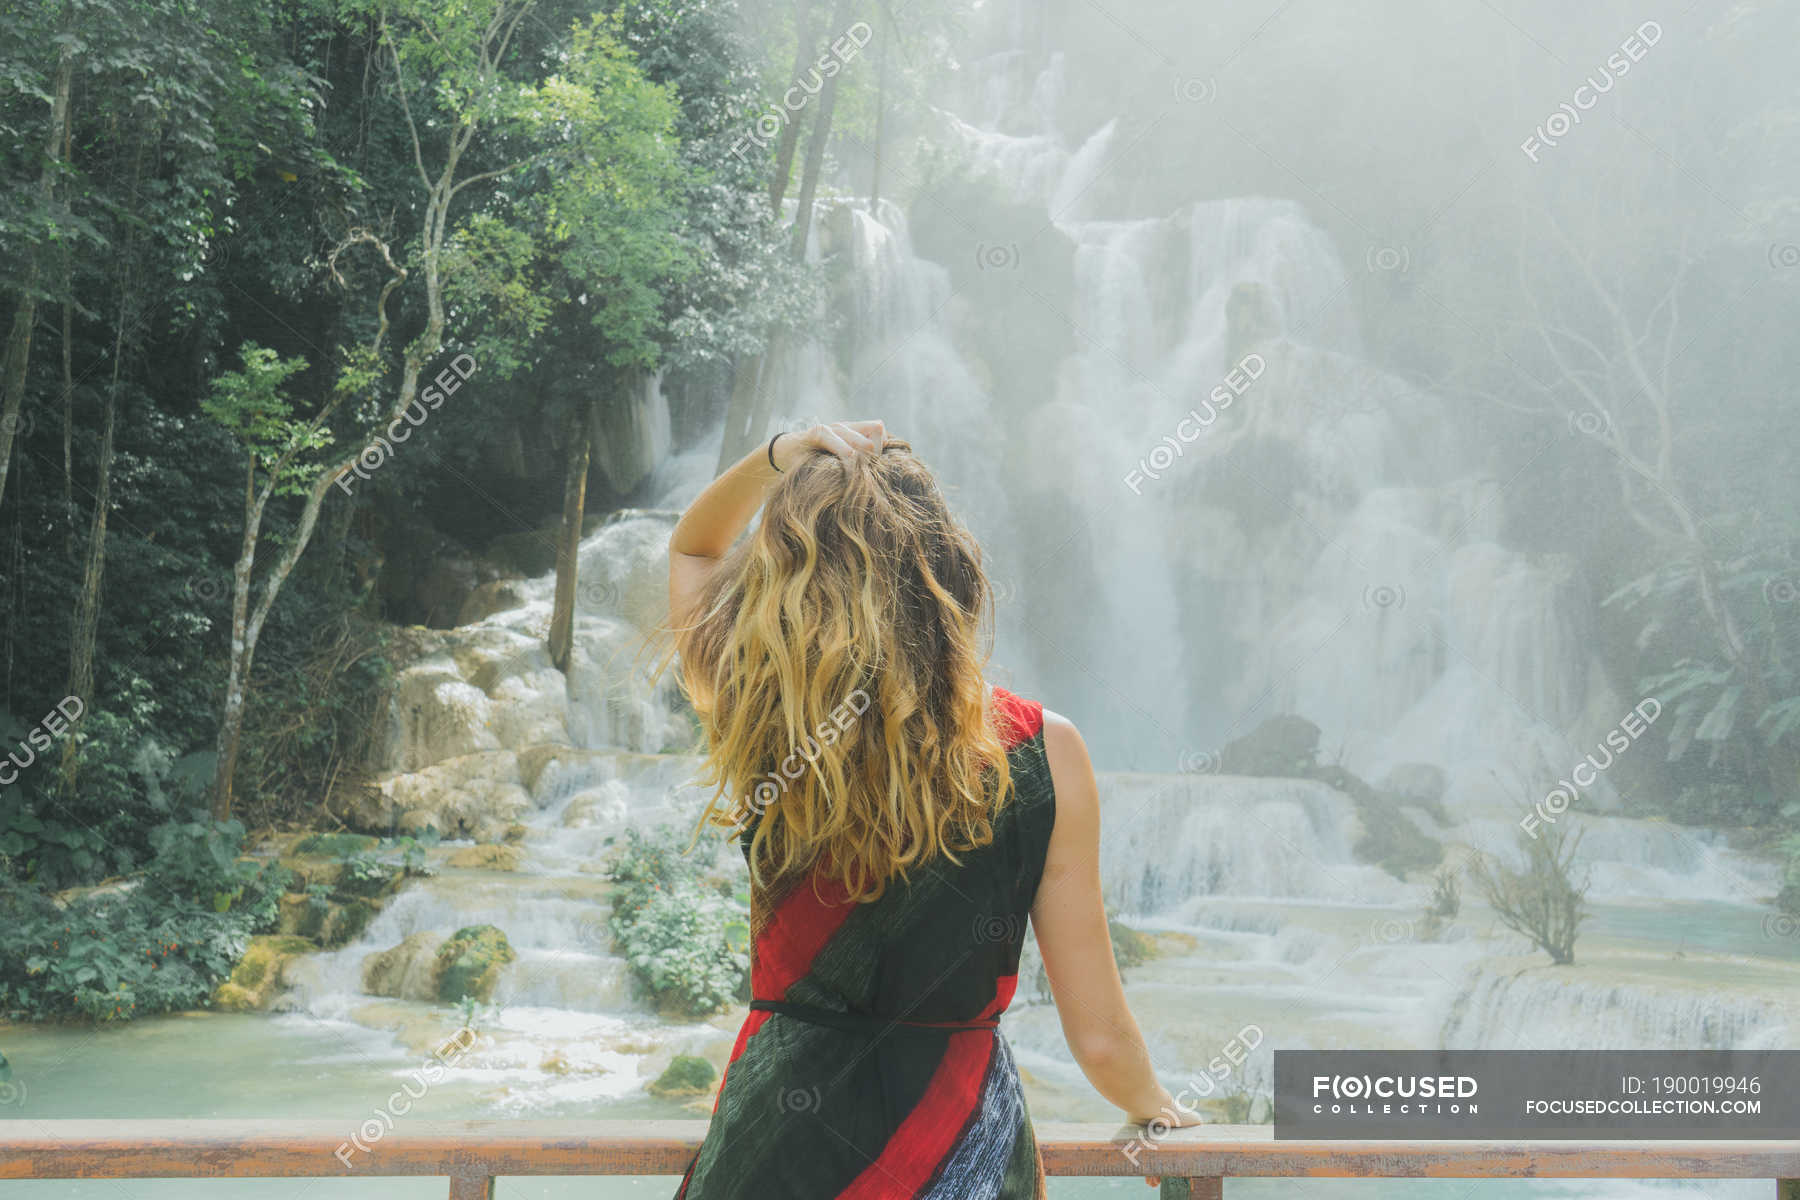 Back View Of Blonde Woman Holding Hair And Looking At Cascade From